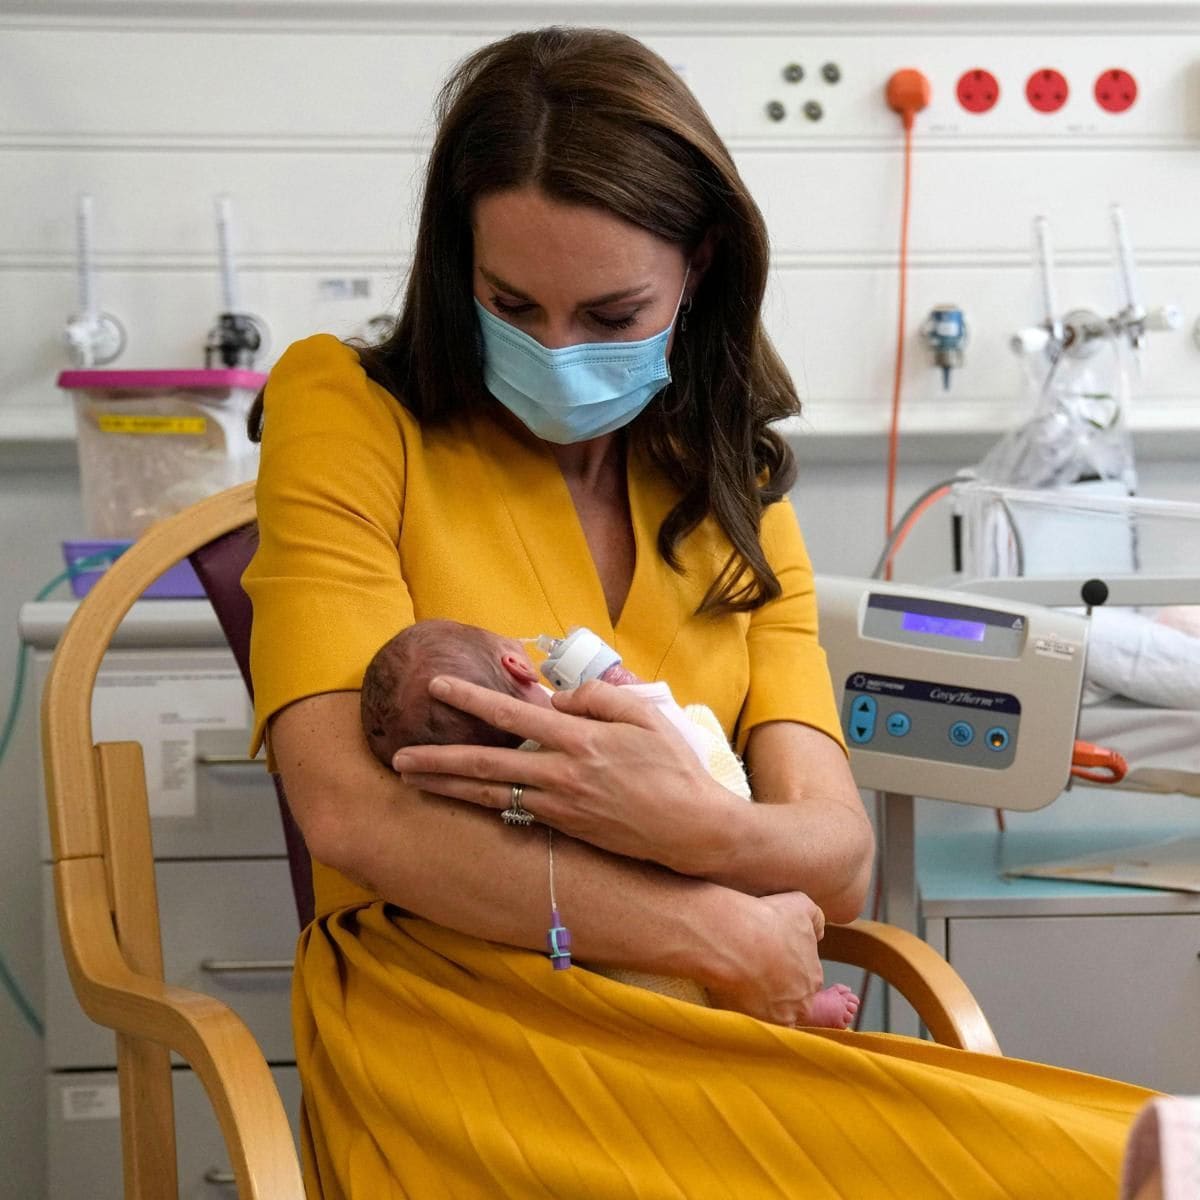 The royal mom of three visited the Royal Surrey County Hospital's maternity unit